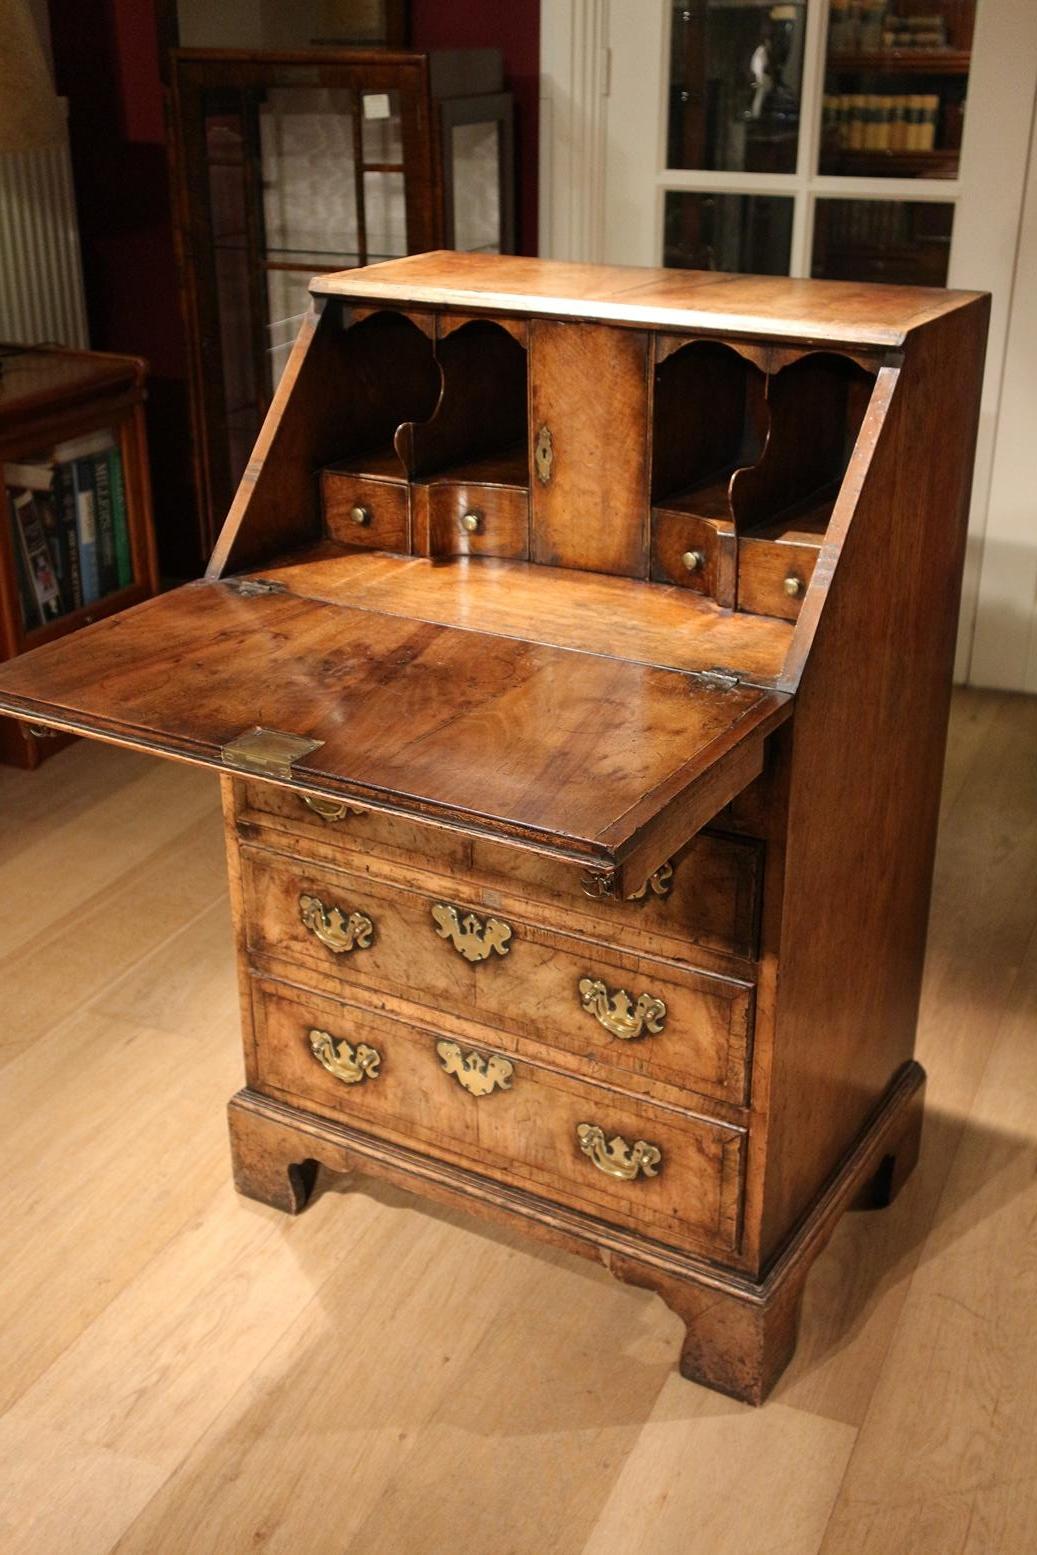 Small walnut bureau in good and original condition. Beautifully patina. Entirely in good condition.
Origin: England
Period: Approx. 1900
Size: Br. 61cm, H. 98cm, D. 45 / 75cm.